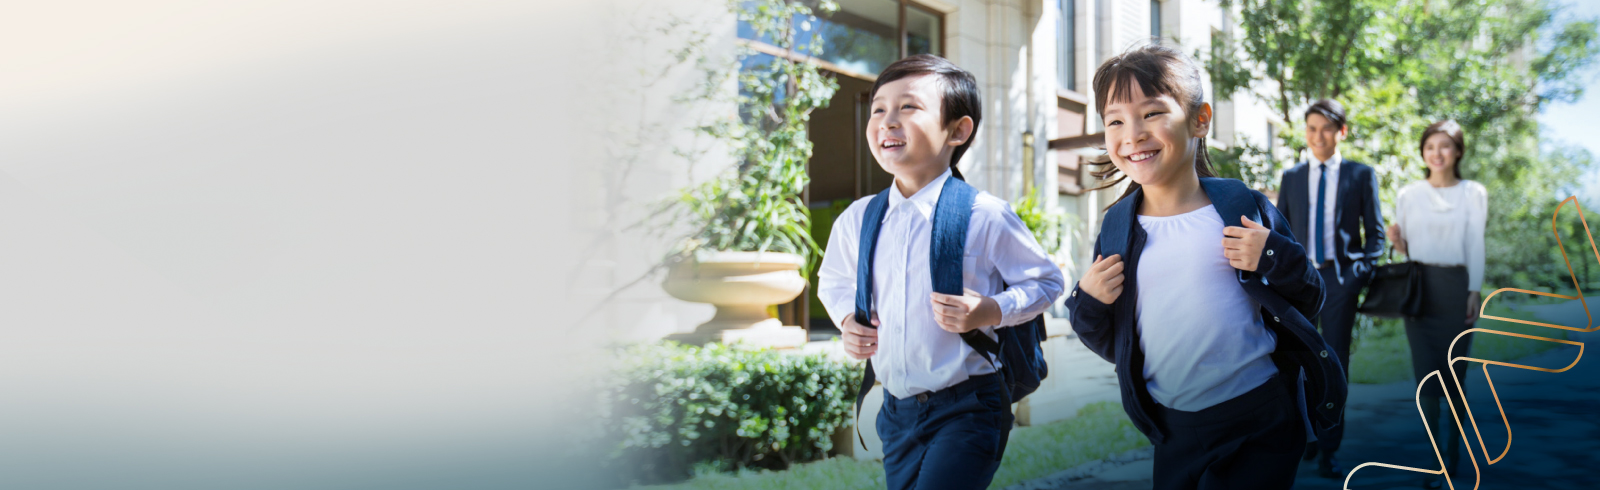 Get RM1,000 cashback when you pay for school fees at selected international schools (Standard Chartered Priority Banking)